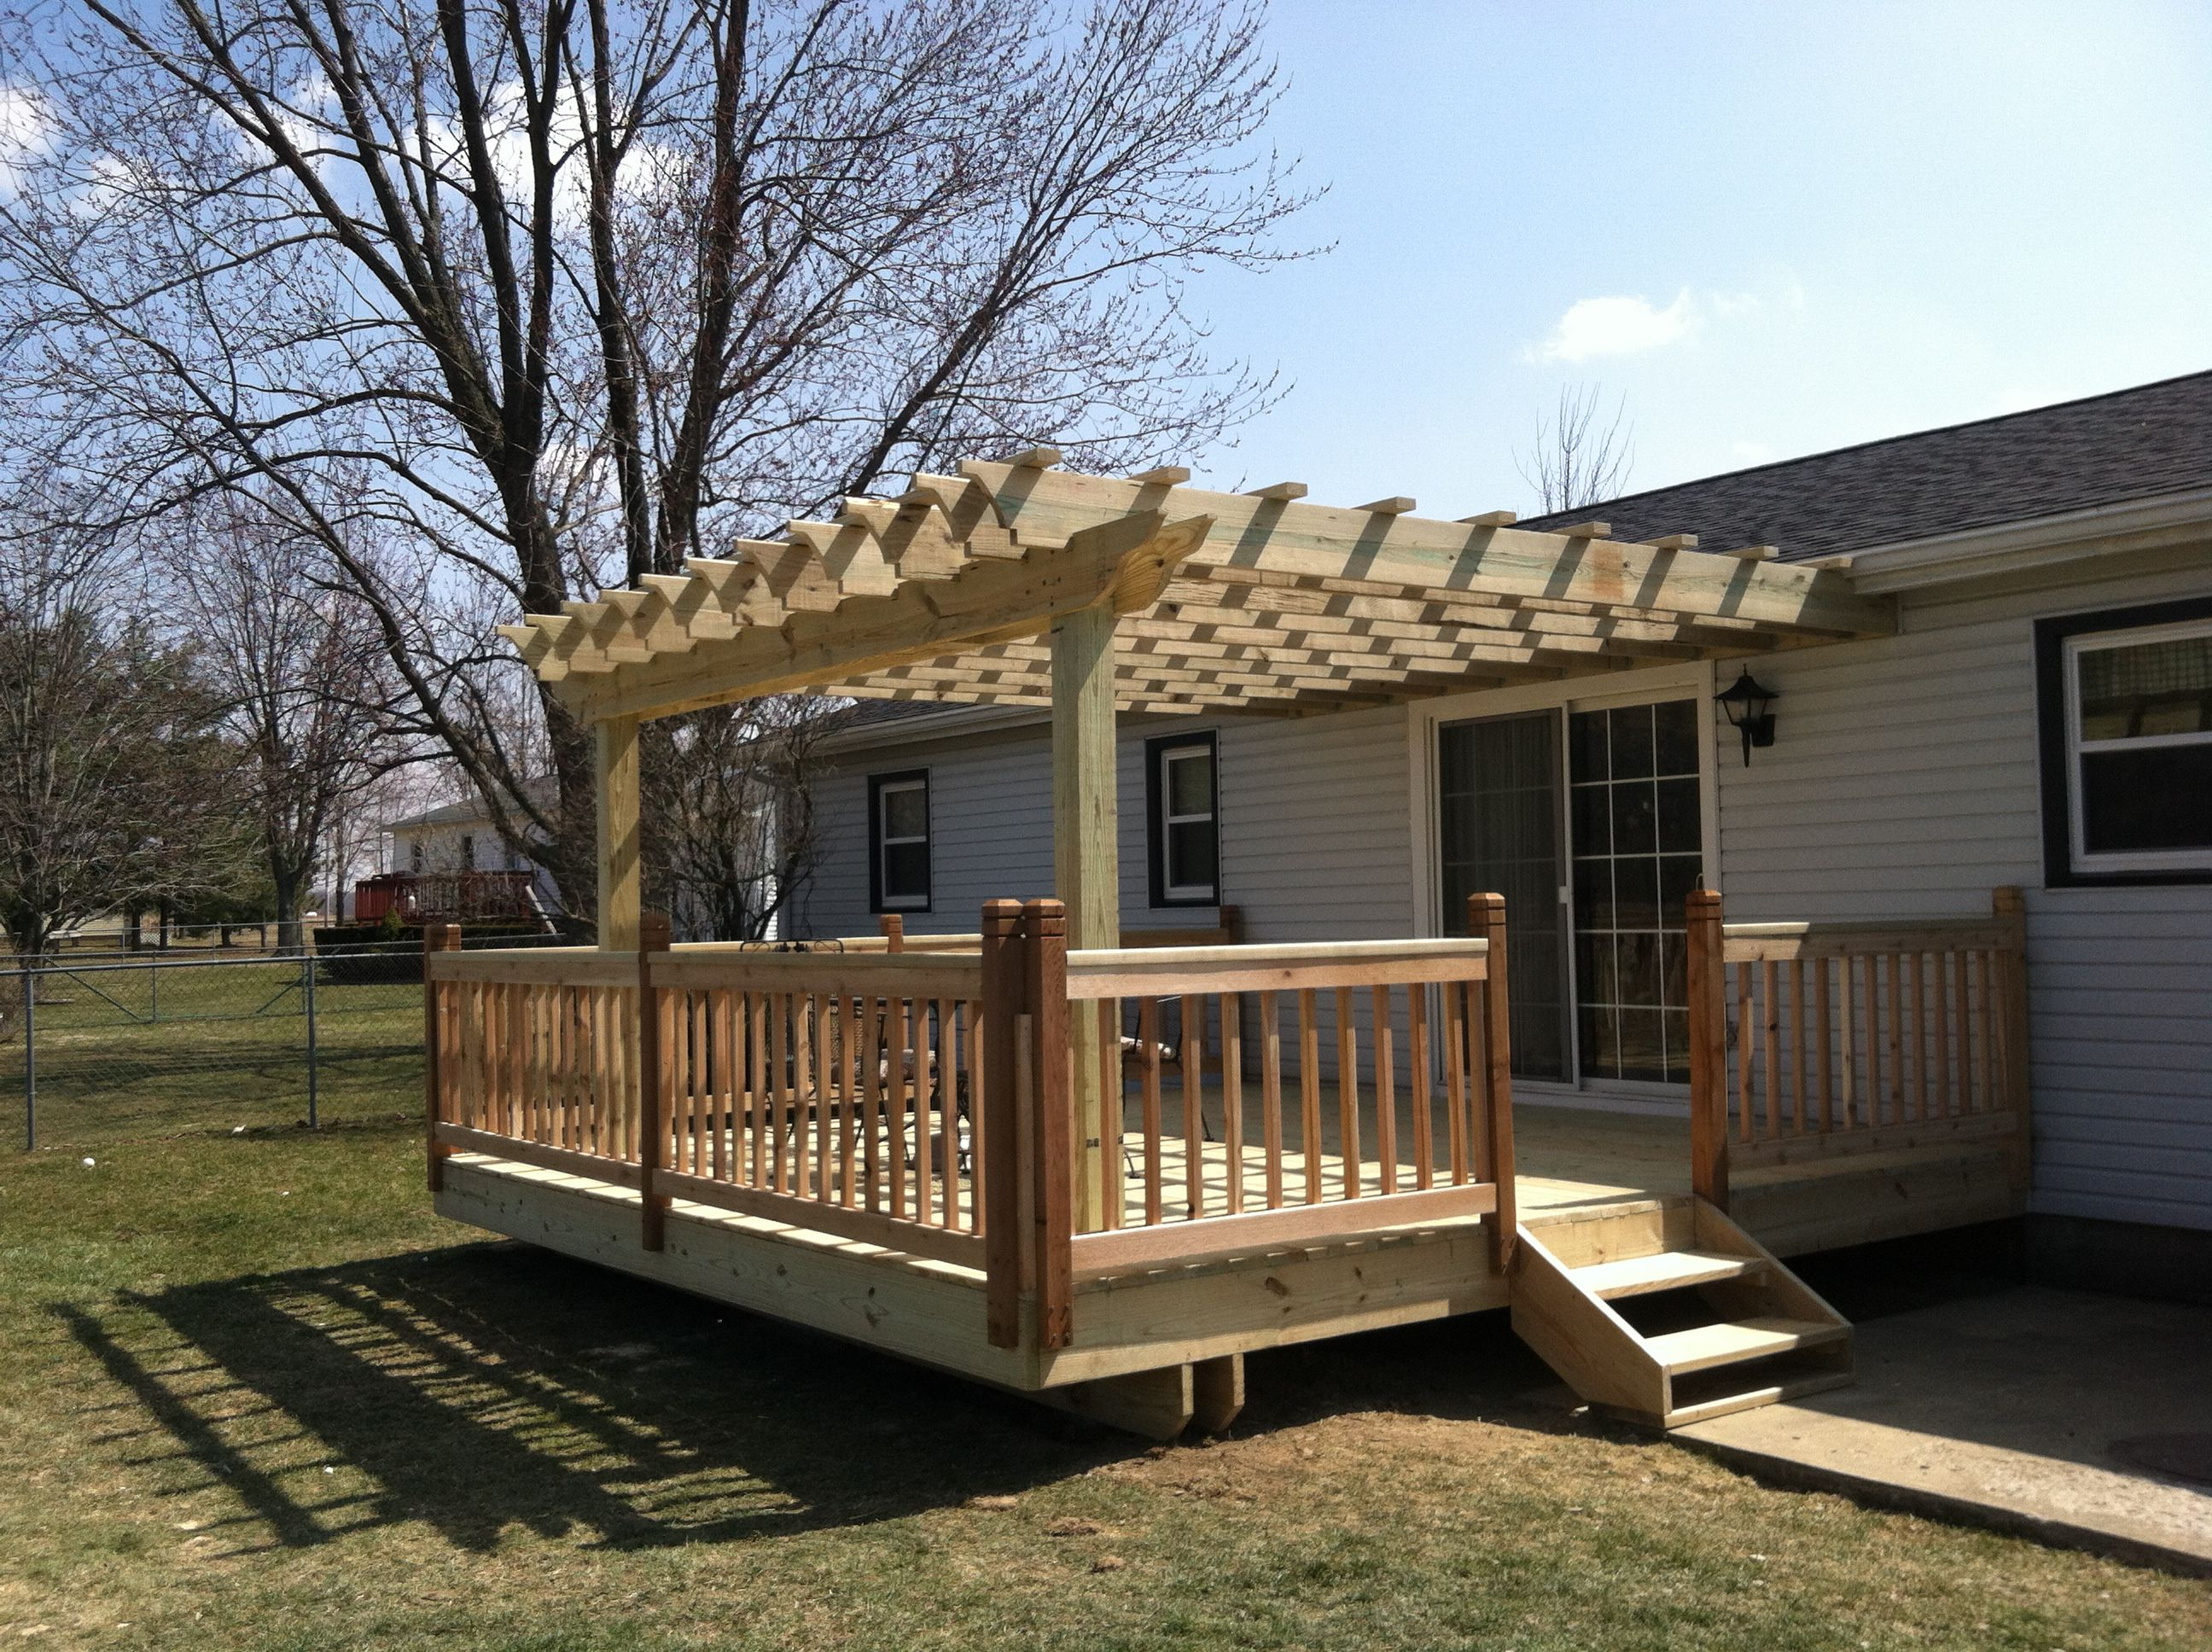 16x16 Deck With Pergola And Cedar Railings Deck With throughout sizing 2592 X 1936